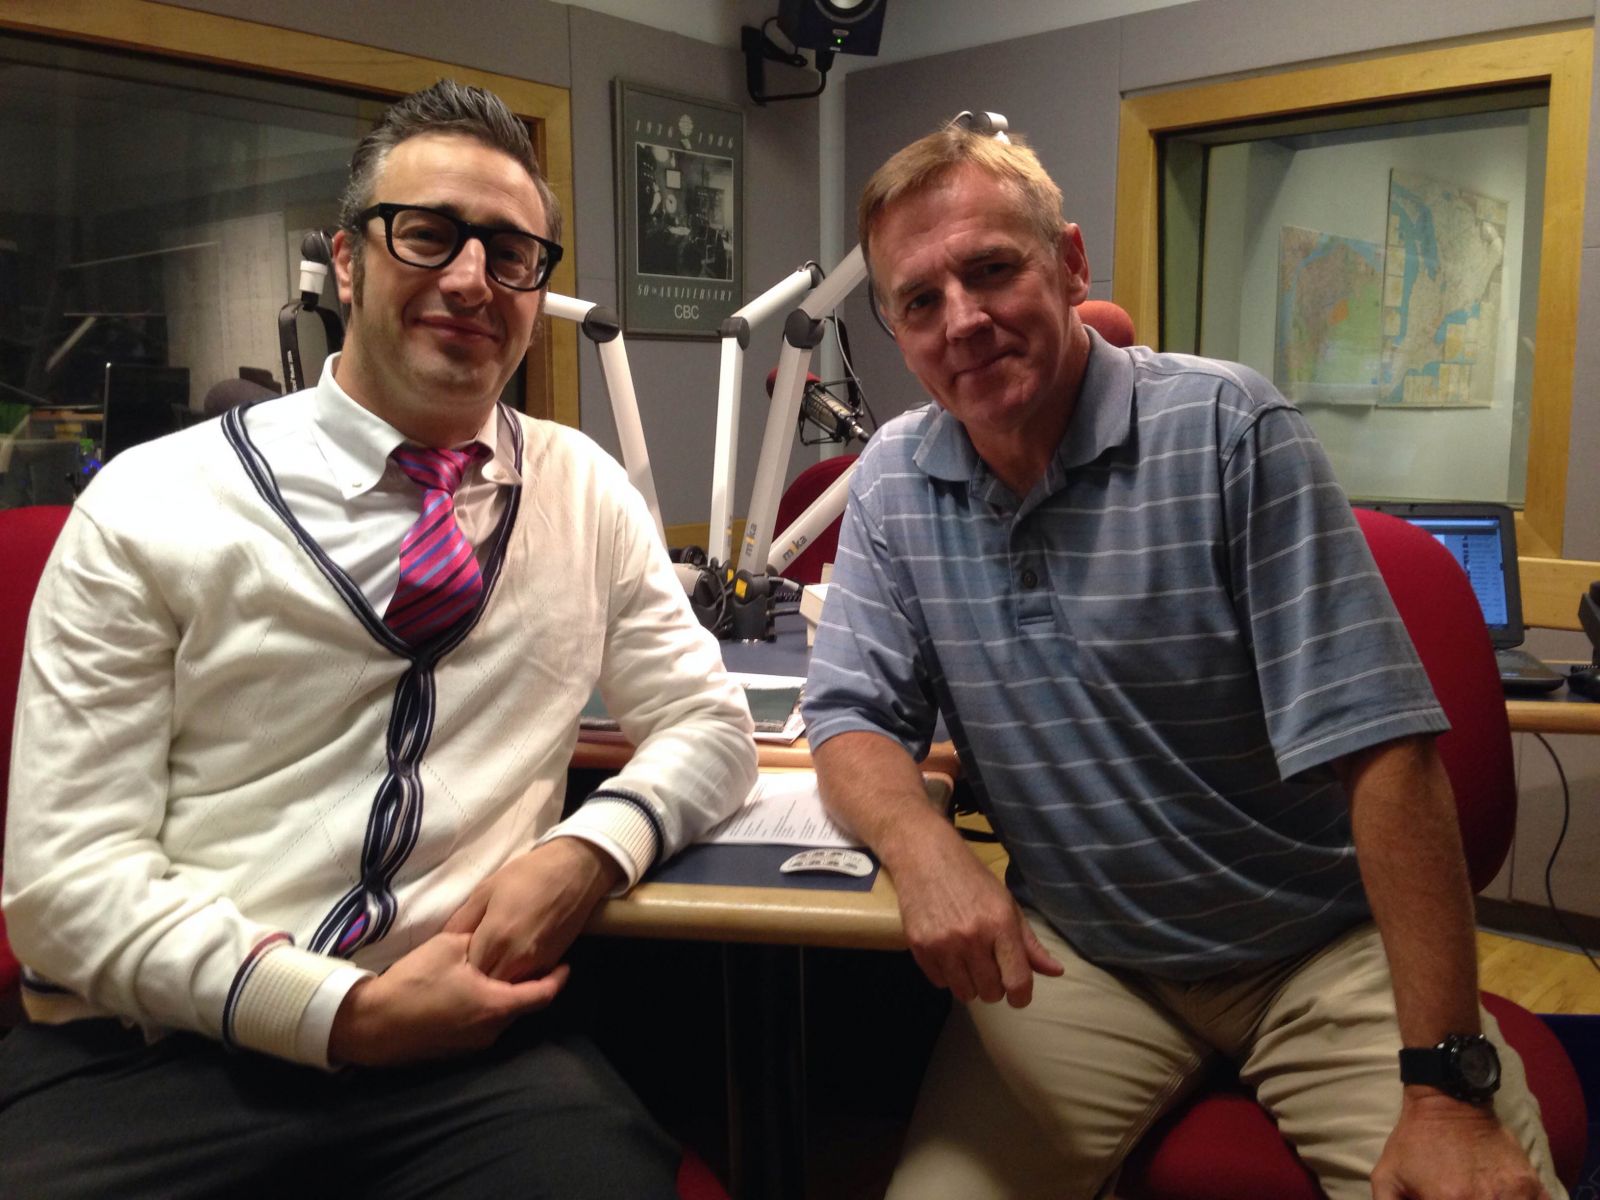 Dr. Pascual-Leone seated with CBC Radio Show host Tony Doucette, for an interview